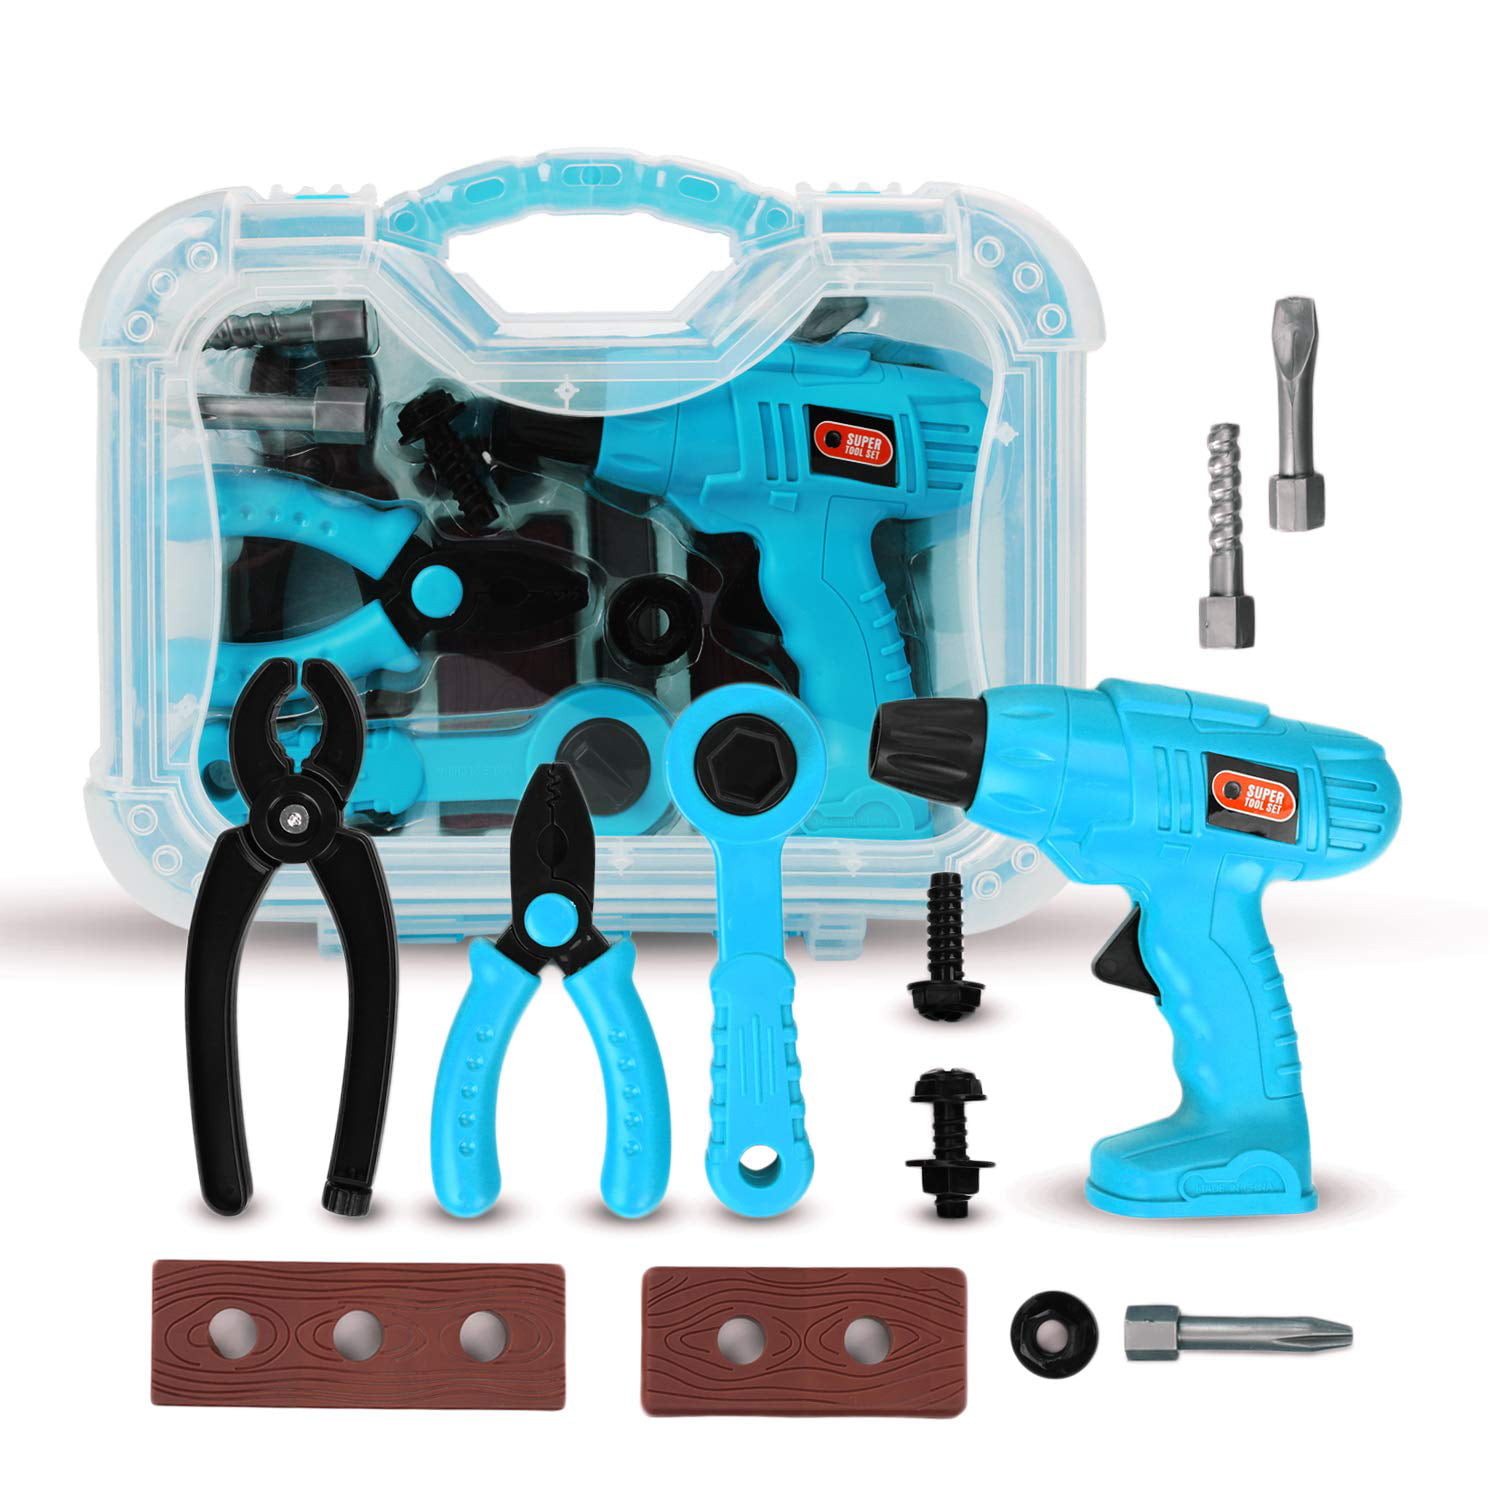 Durable Kids Tool Set with Electronic Cordless Drill and 18 Pretend Play 